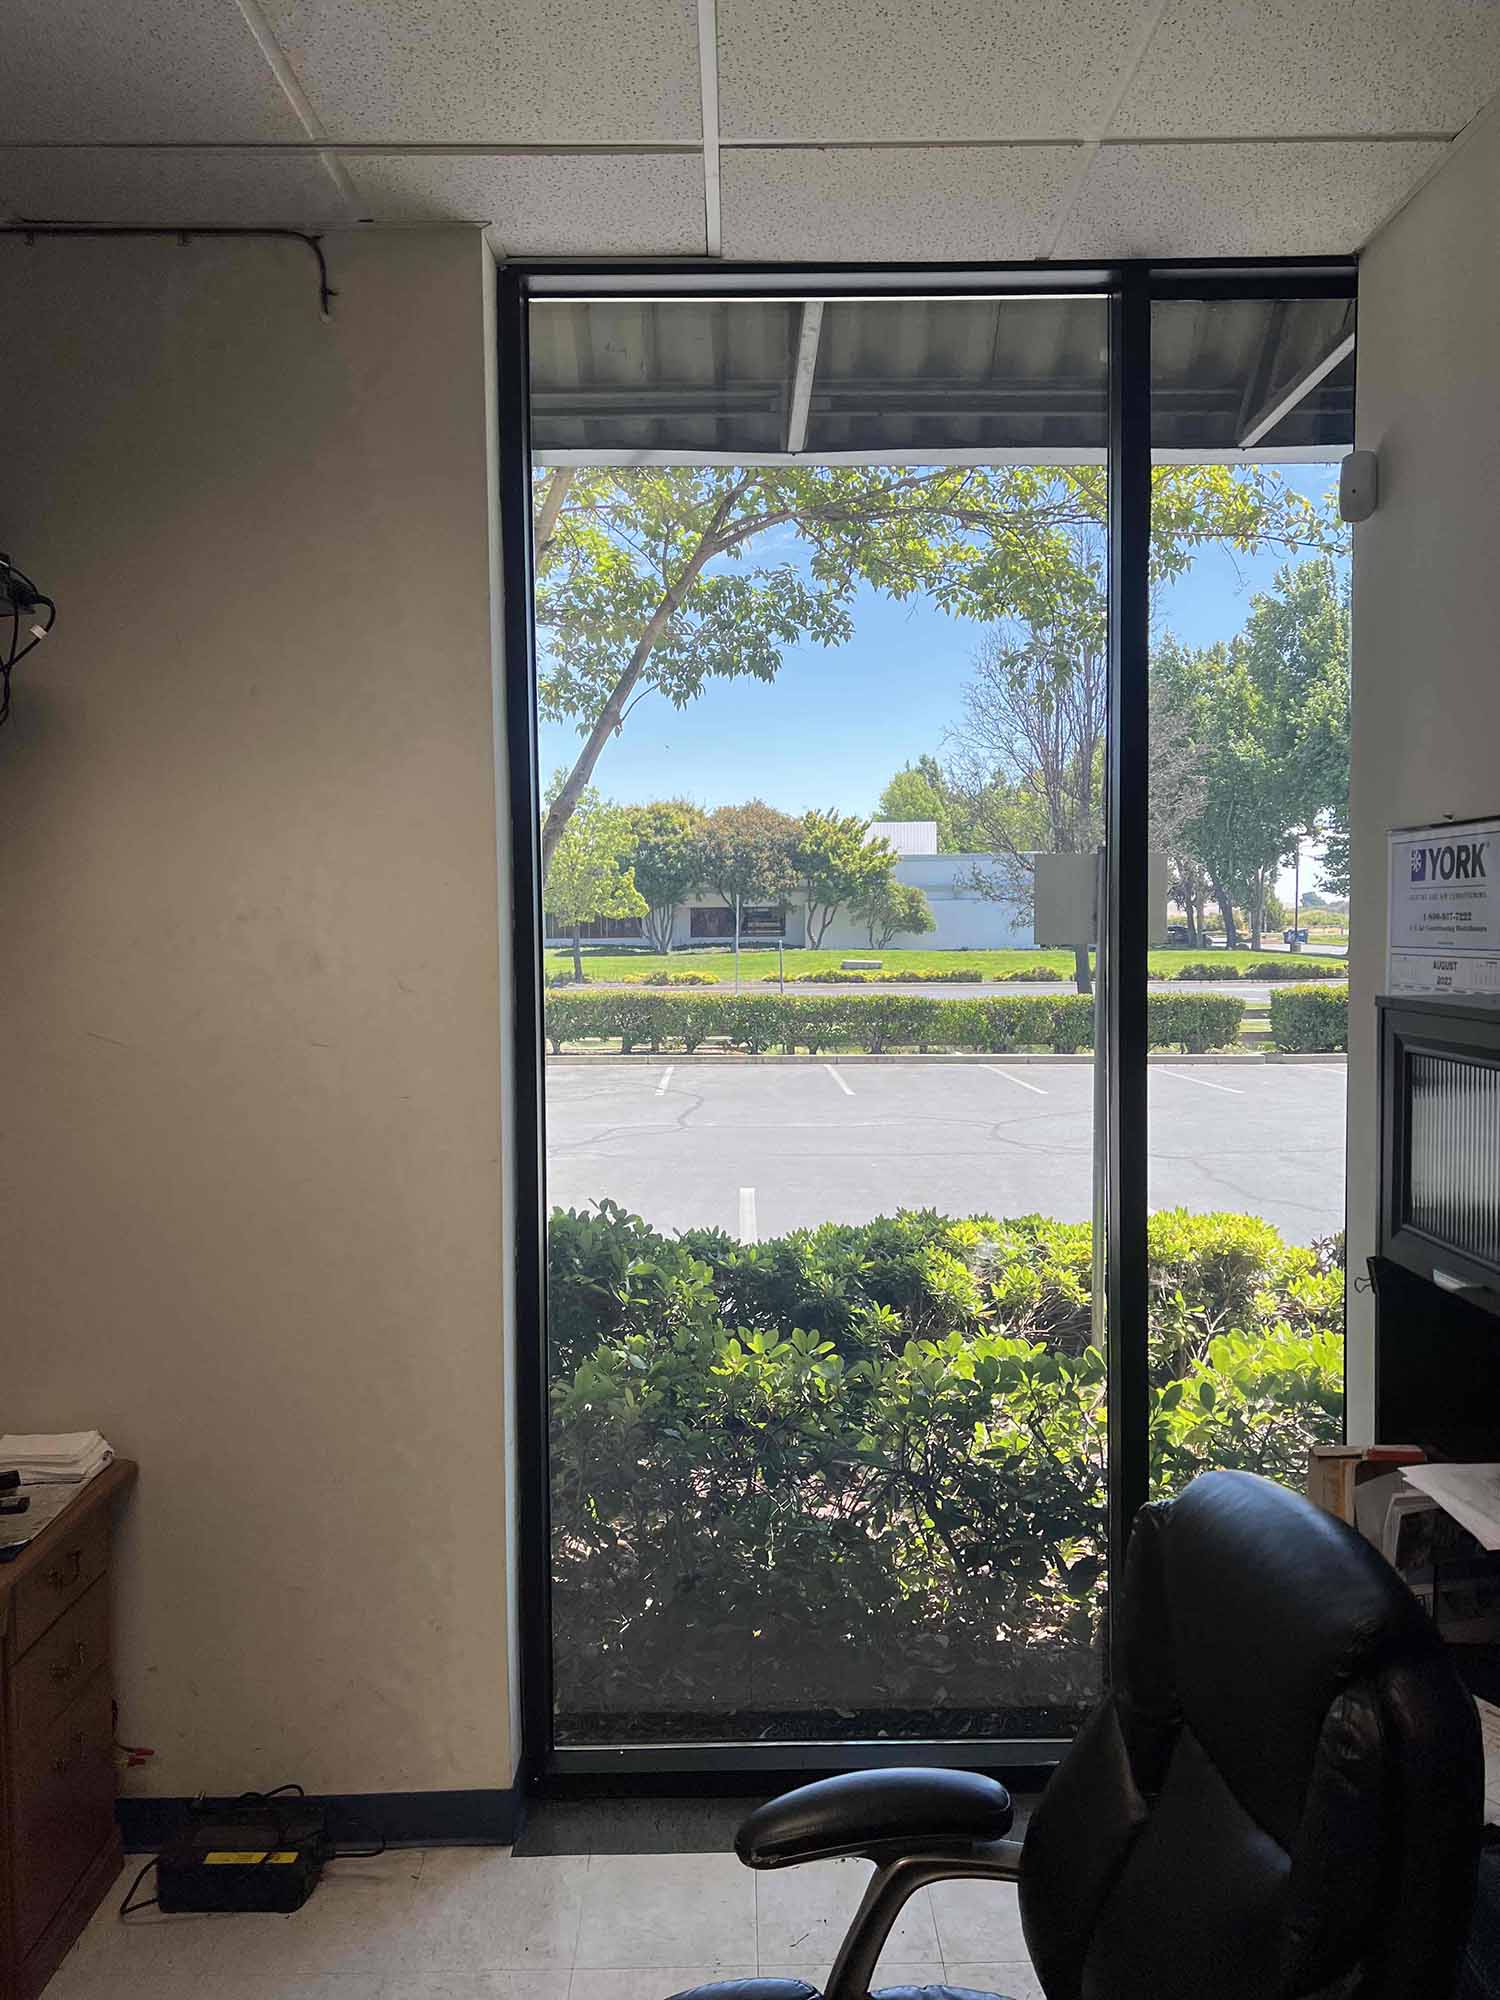 3M Security Window Film for a Fairfield, CA Office. Get a free estimate from ClimatePro.